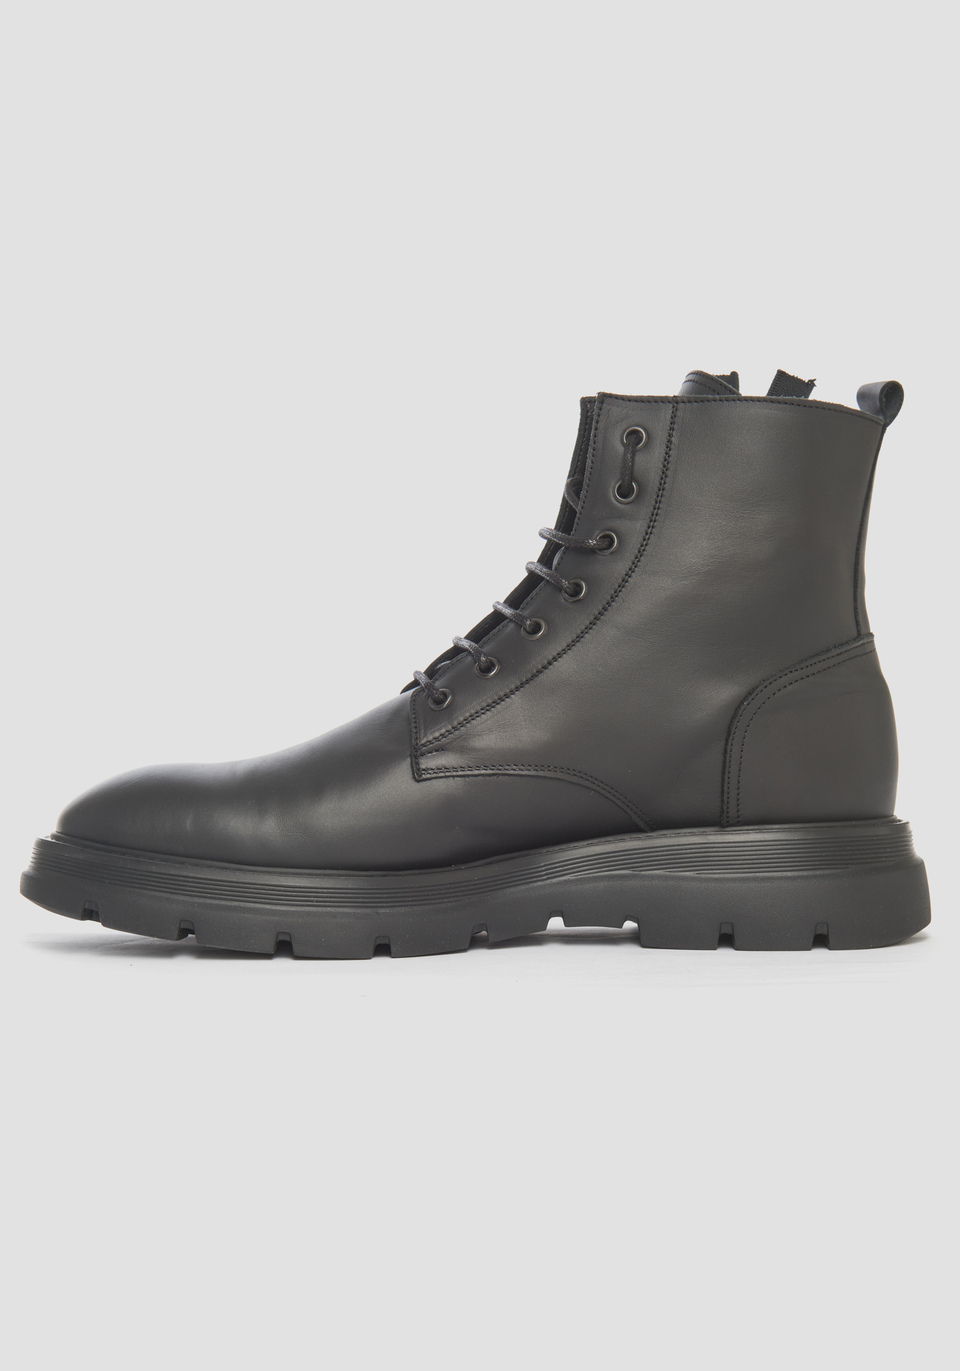 DODGE LEATHER BOOTS WITH SIDE ZIP - Antony Morato Online Shop